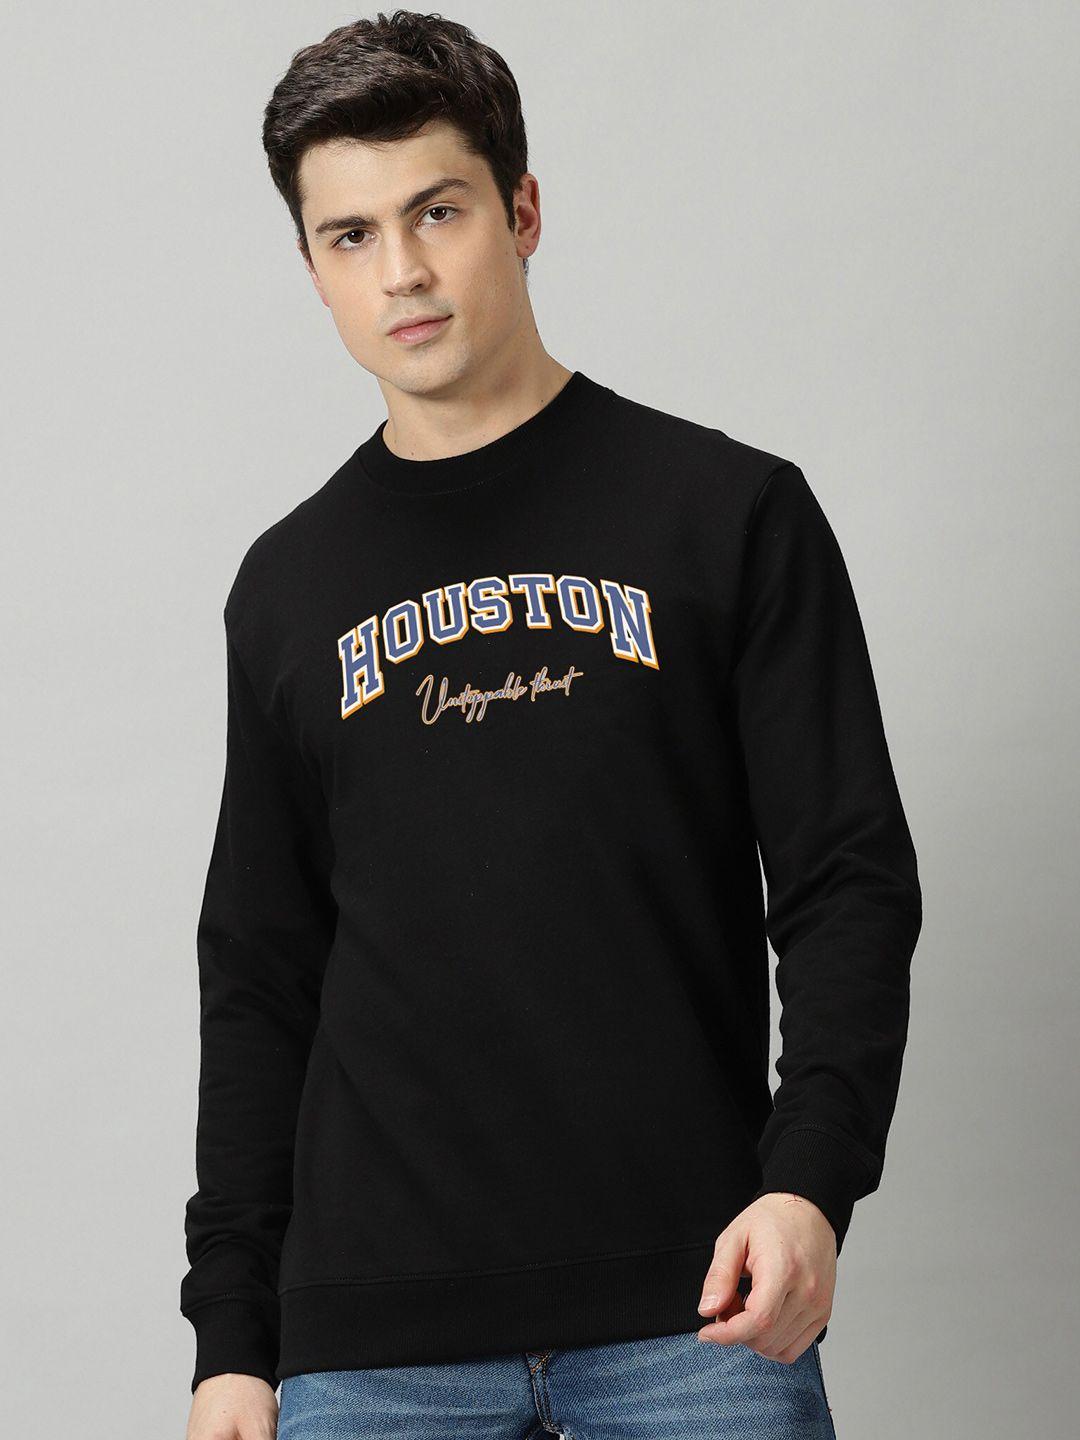 the hollander typography printed long sleeves cotton t-shirt